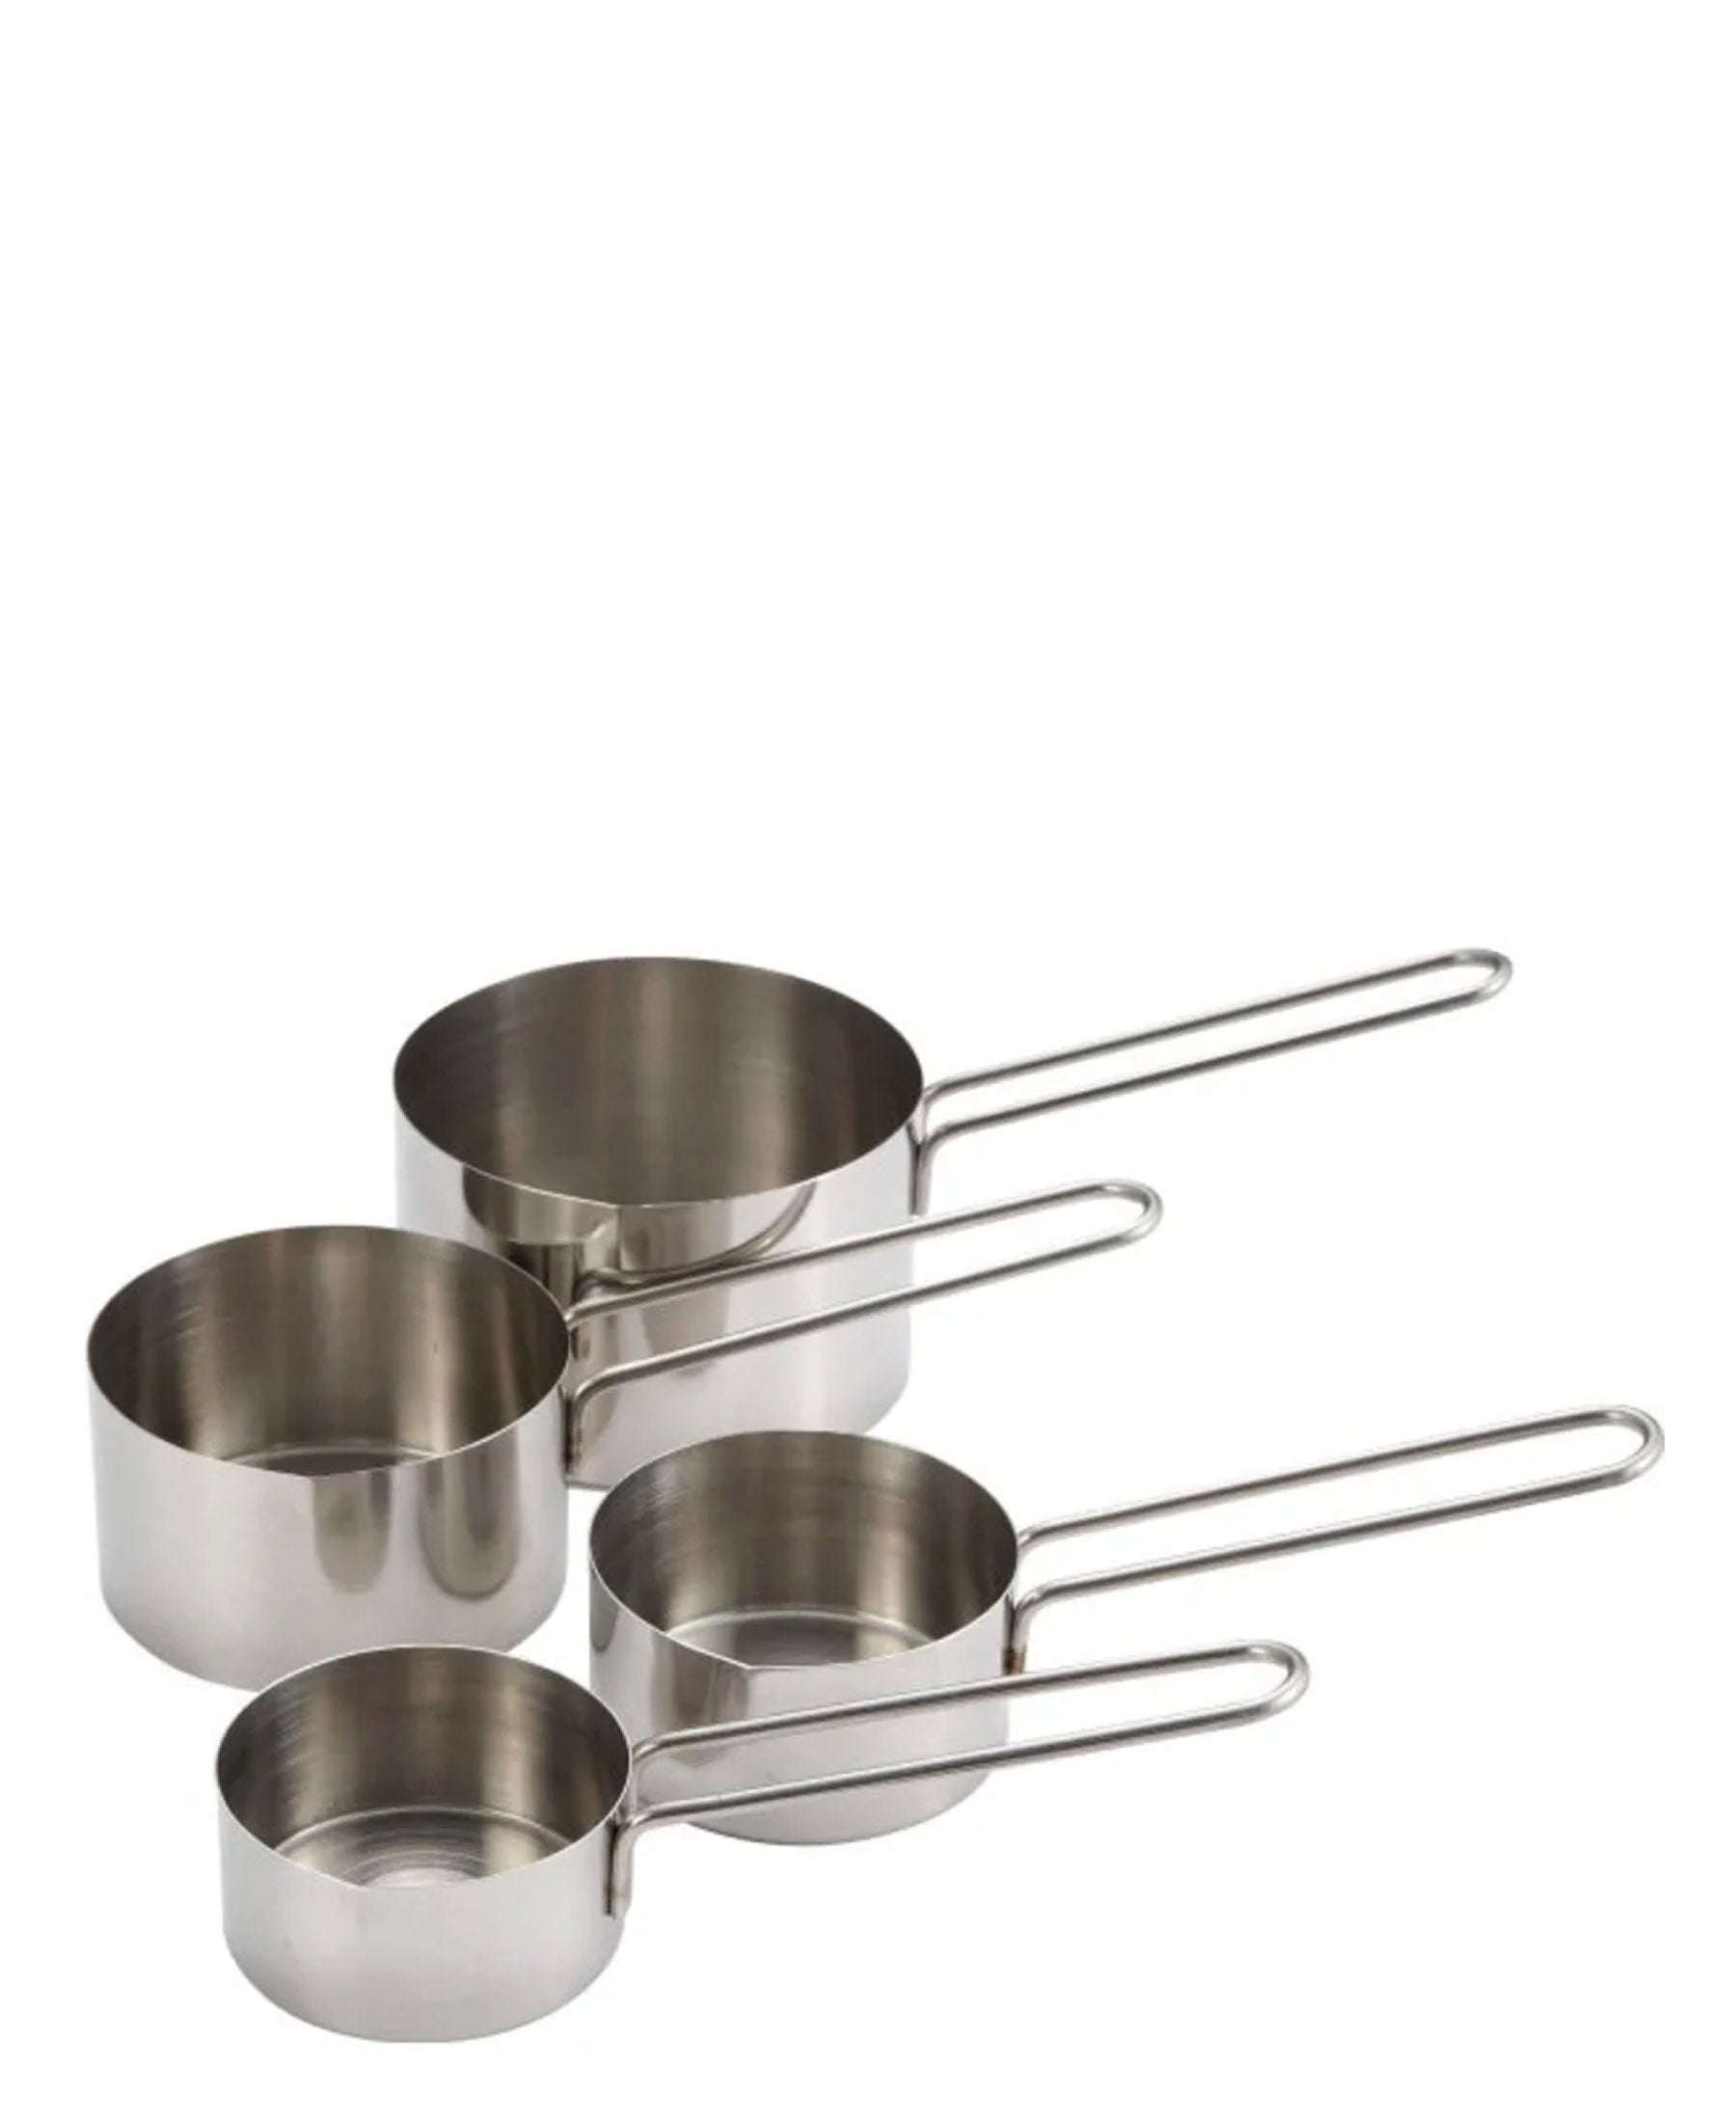 Kitchen Life Stainless Steel 4 Piece Measuring Cups - Silver